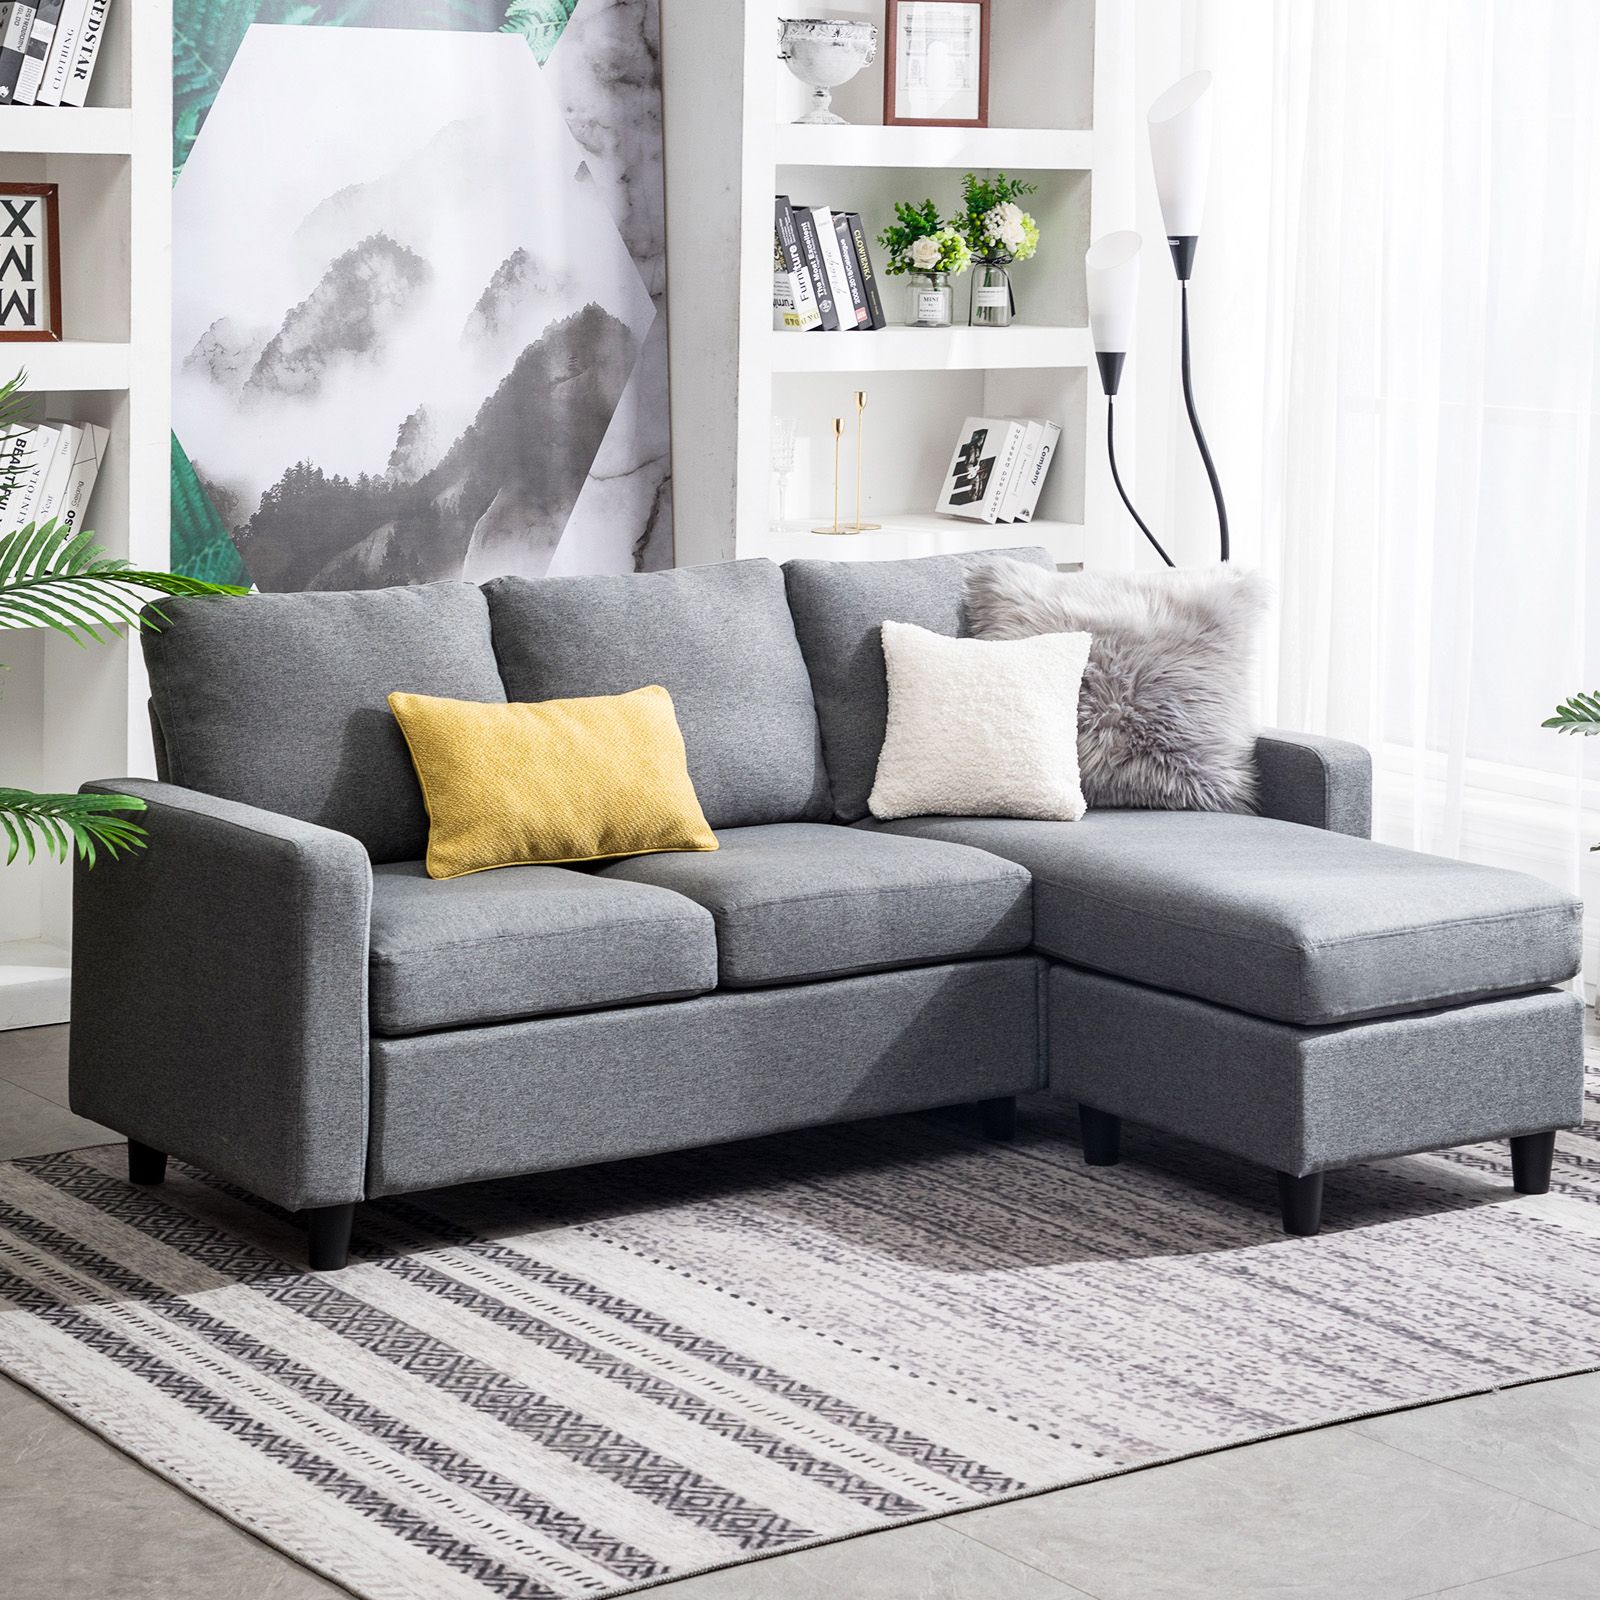 Grey Sectional Sofa L Shaped Couch W/reversible Chaise For Small Space Throughout Sofas For Small Spaces (View 19 of 20)